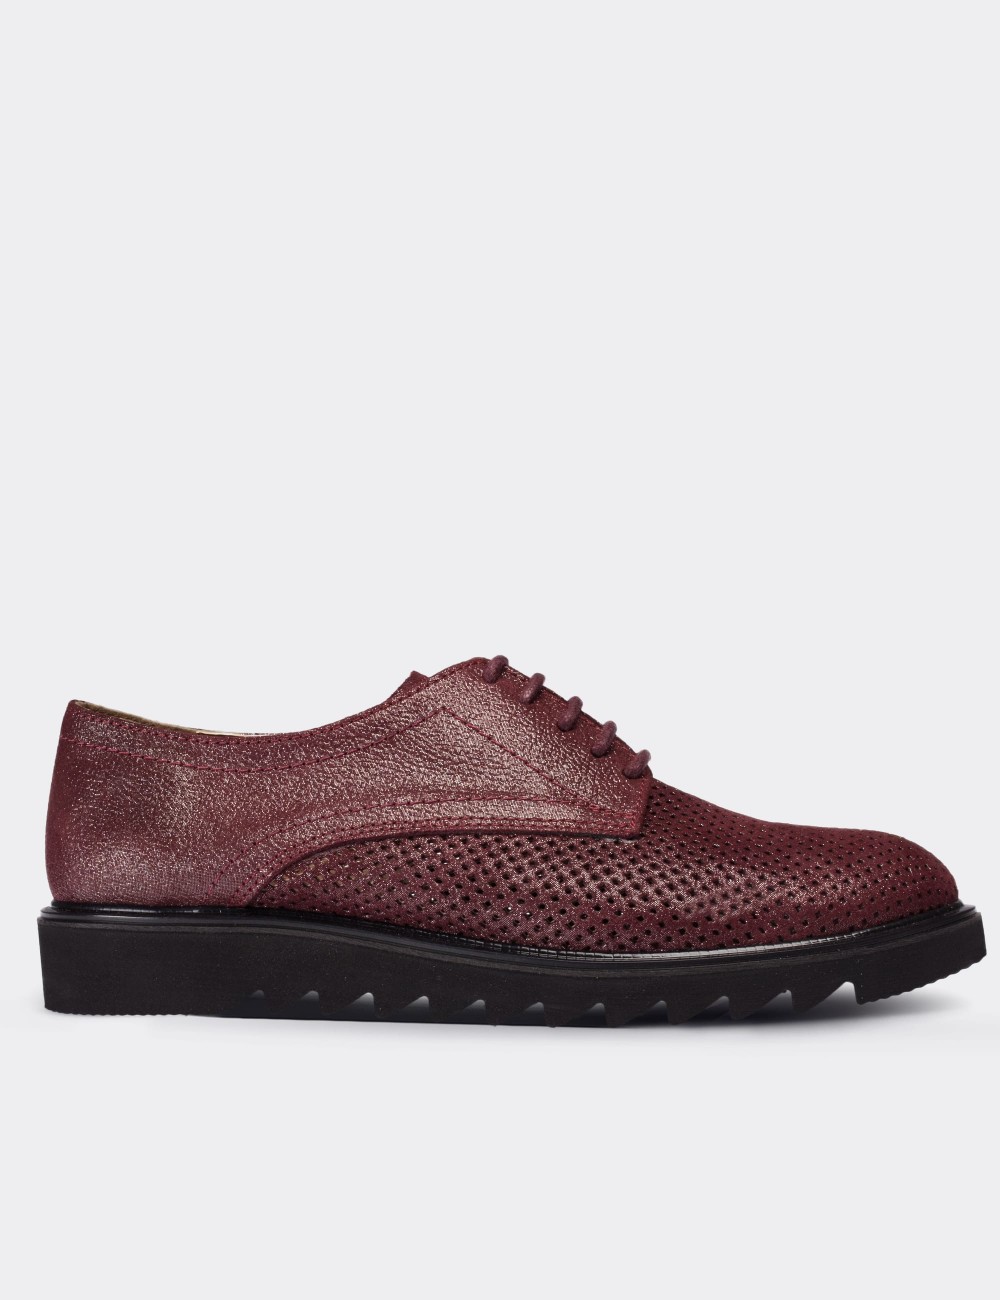 Burgundy Suede Leather Lace-up Shoes - 01430ZBRDP02